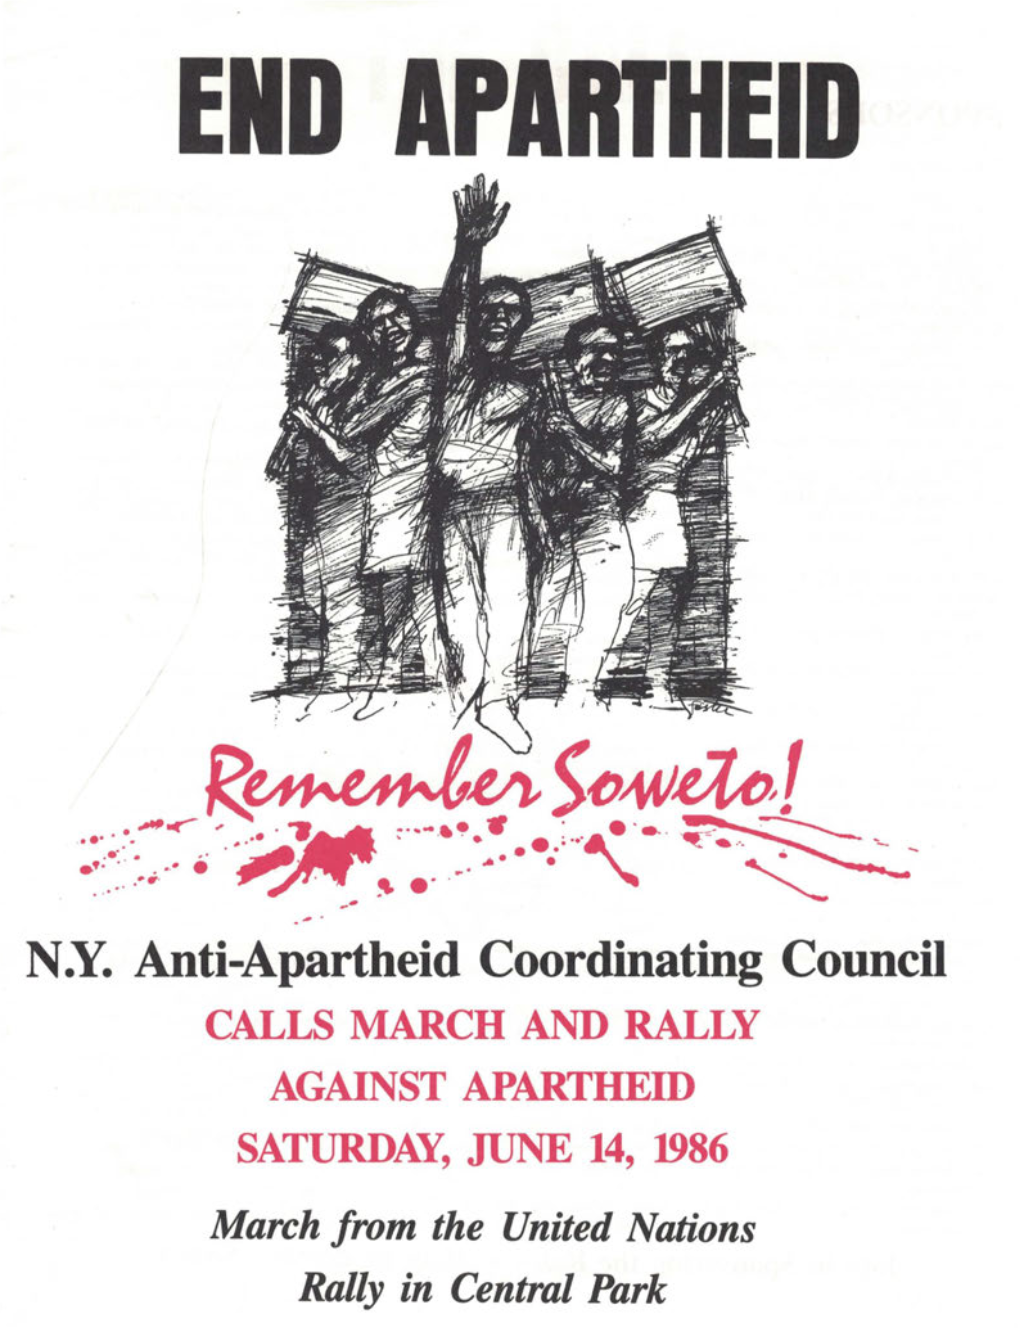 N.Y. Anti-Apartheid Coordinating Council CALLS MARCH and RALLY AGAINST APARTHEID SATURDAY, JUNE 14, 1986 March from the United Nations Rally in Central Park SPONSORS